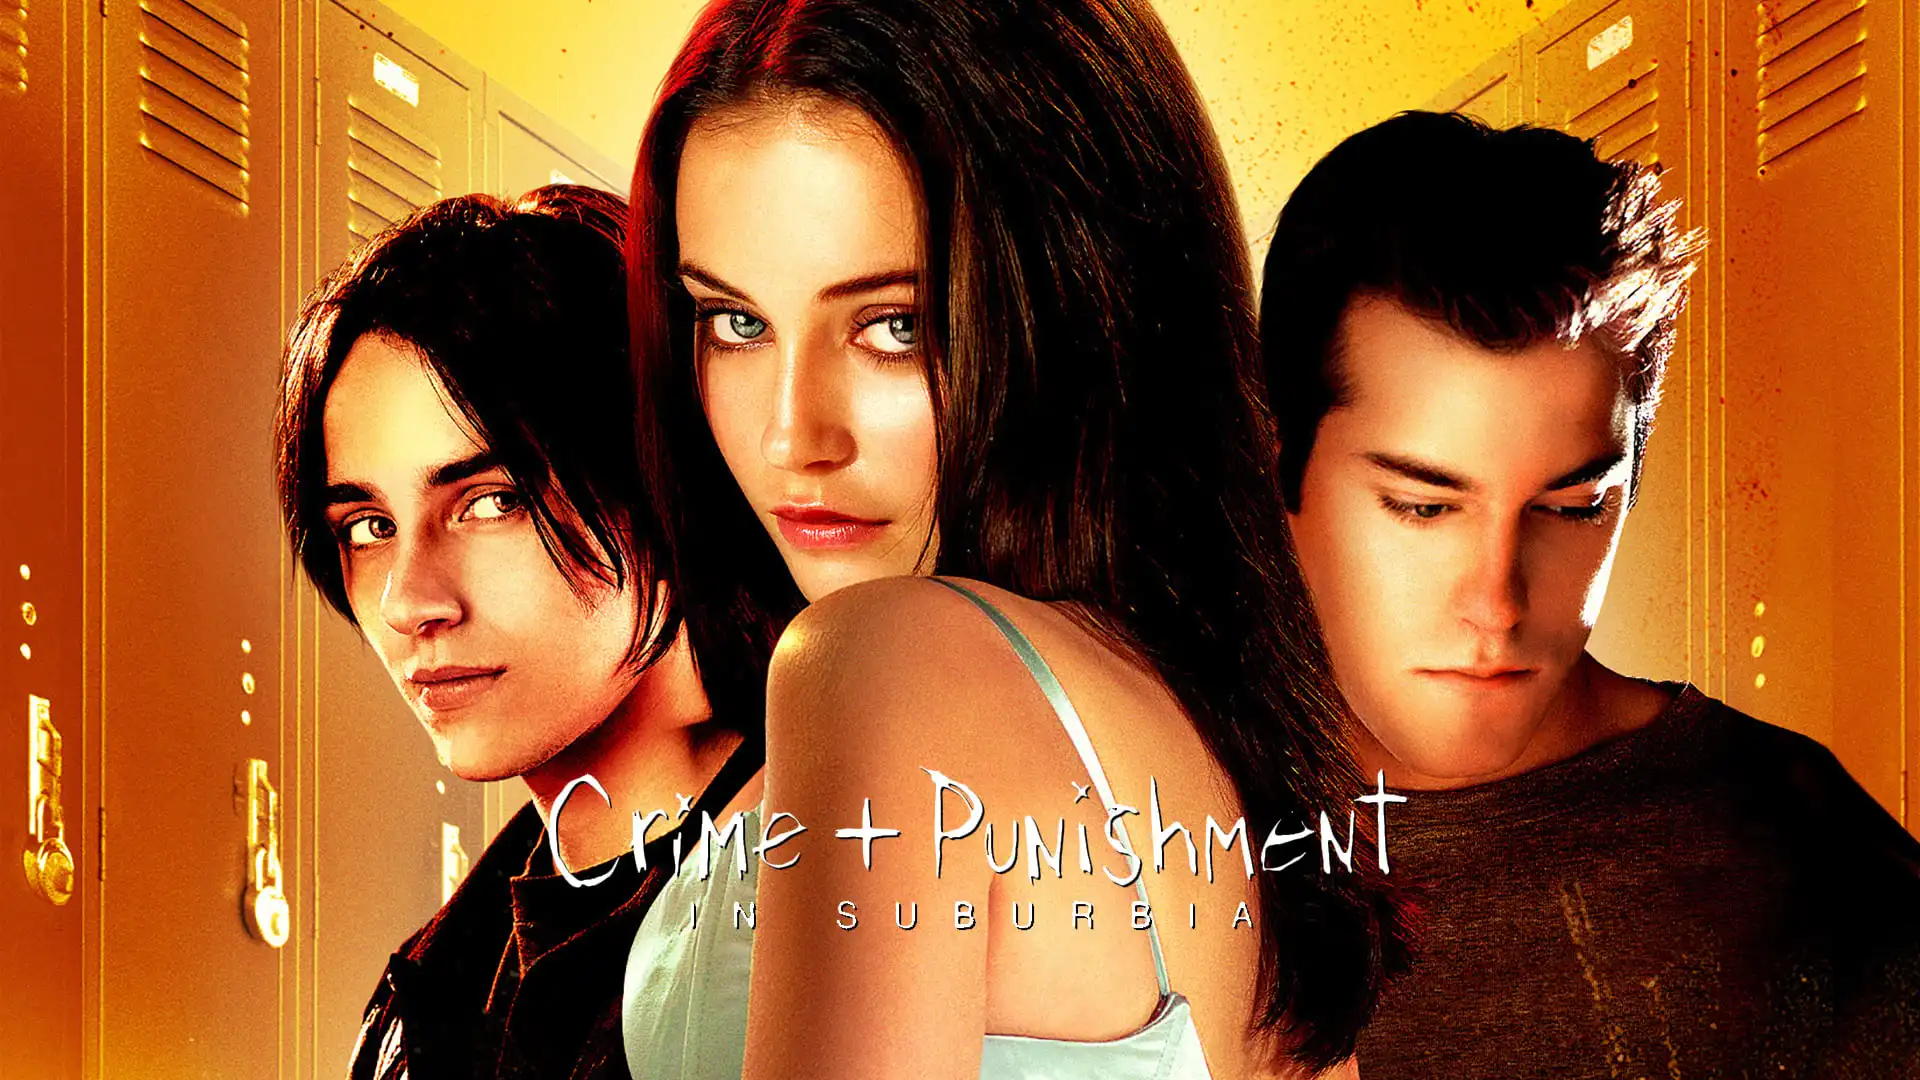 Watch and Download Crime + Punishment in Suburbia 2